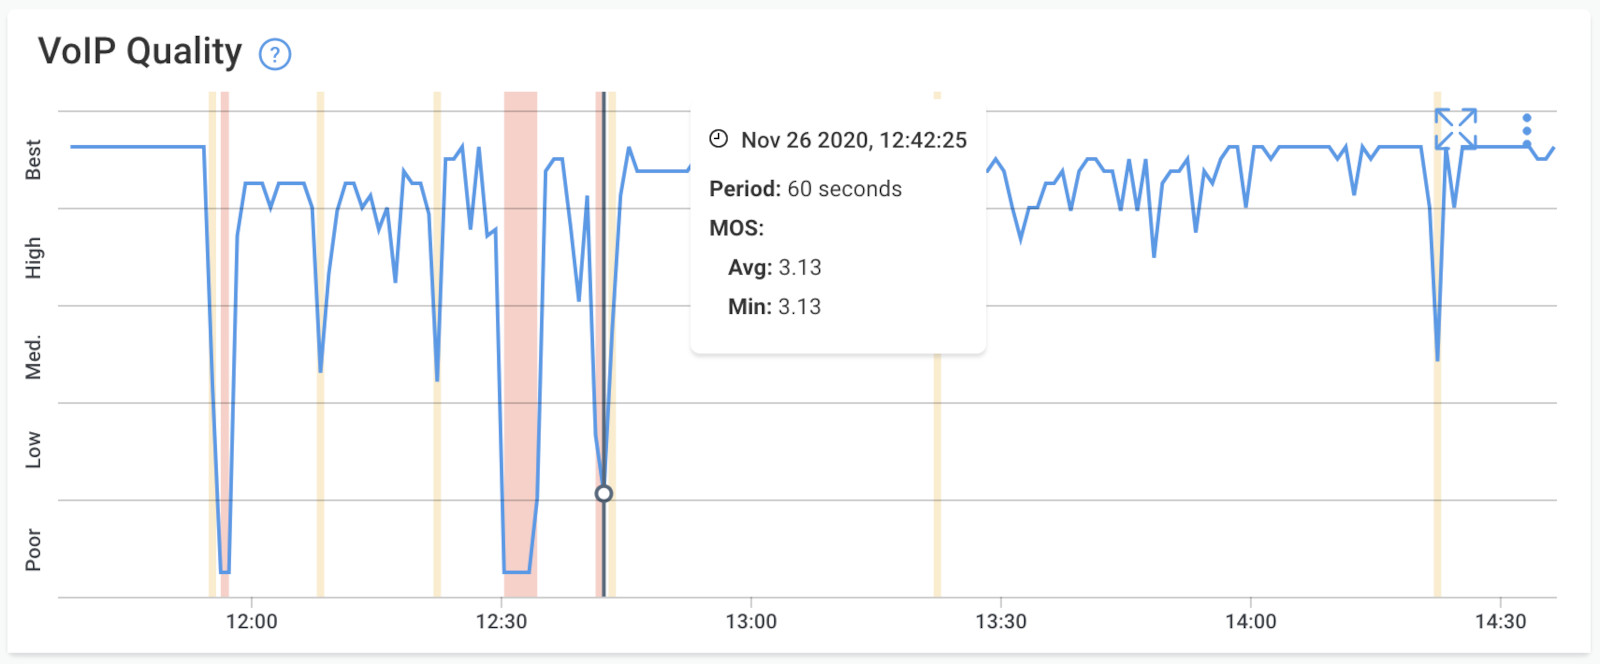 Obkio VoIP Monitoring Quality Graph